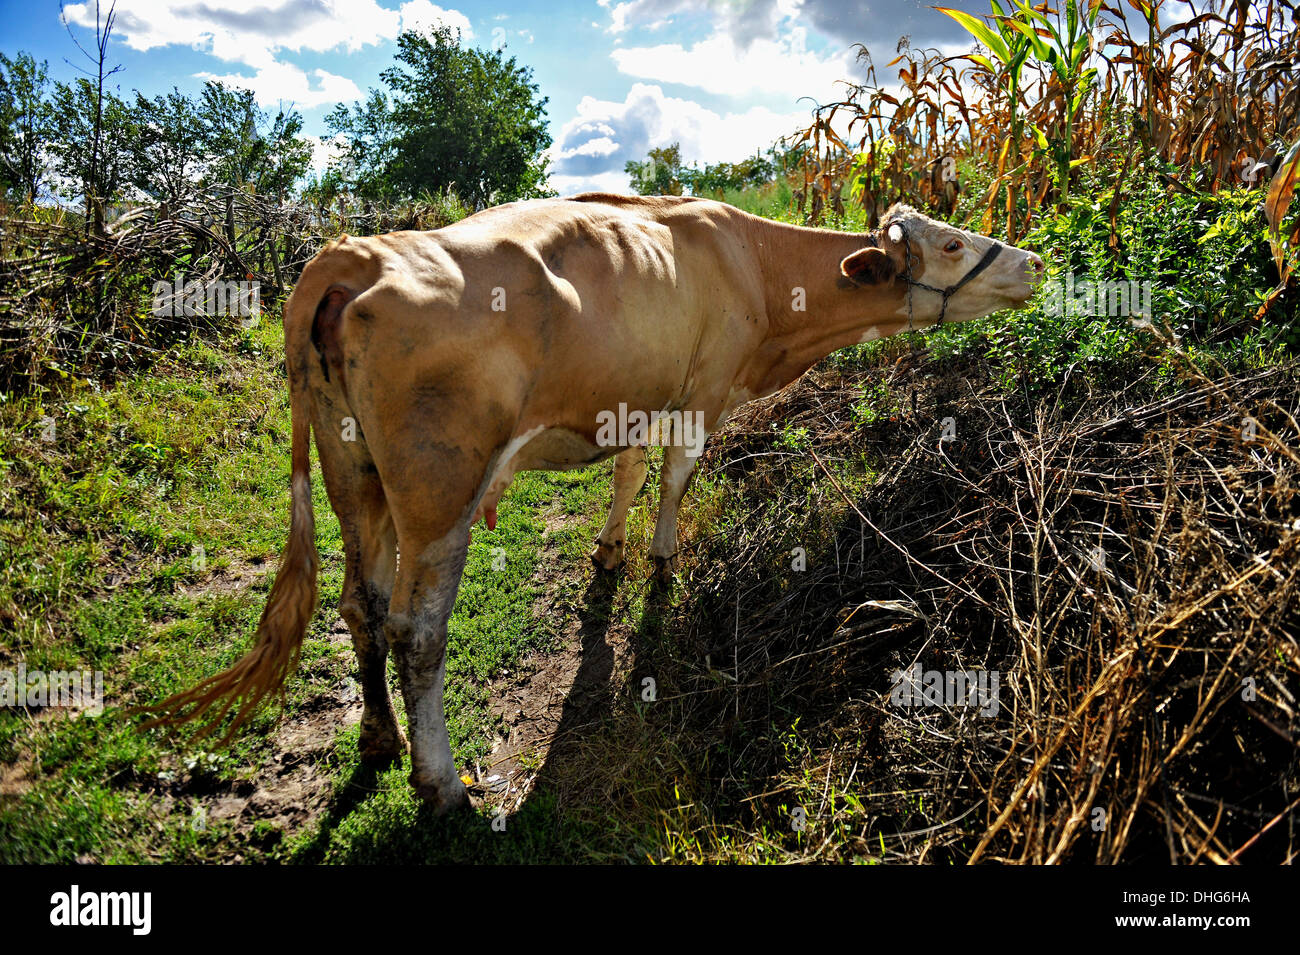 Countryside scene with a dairy cow eating grass Stock Photo